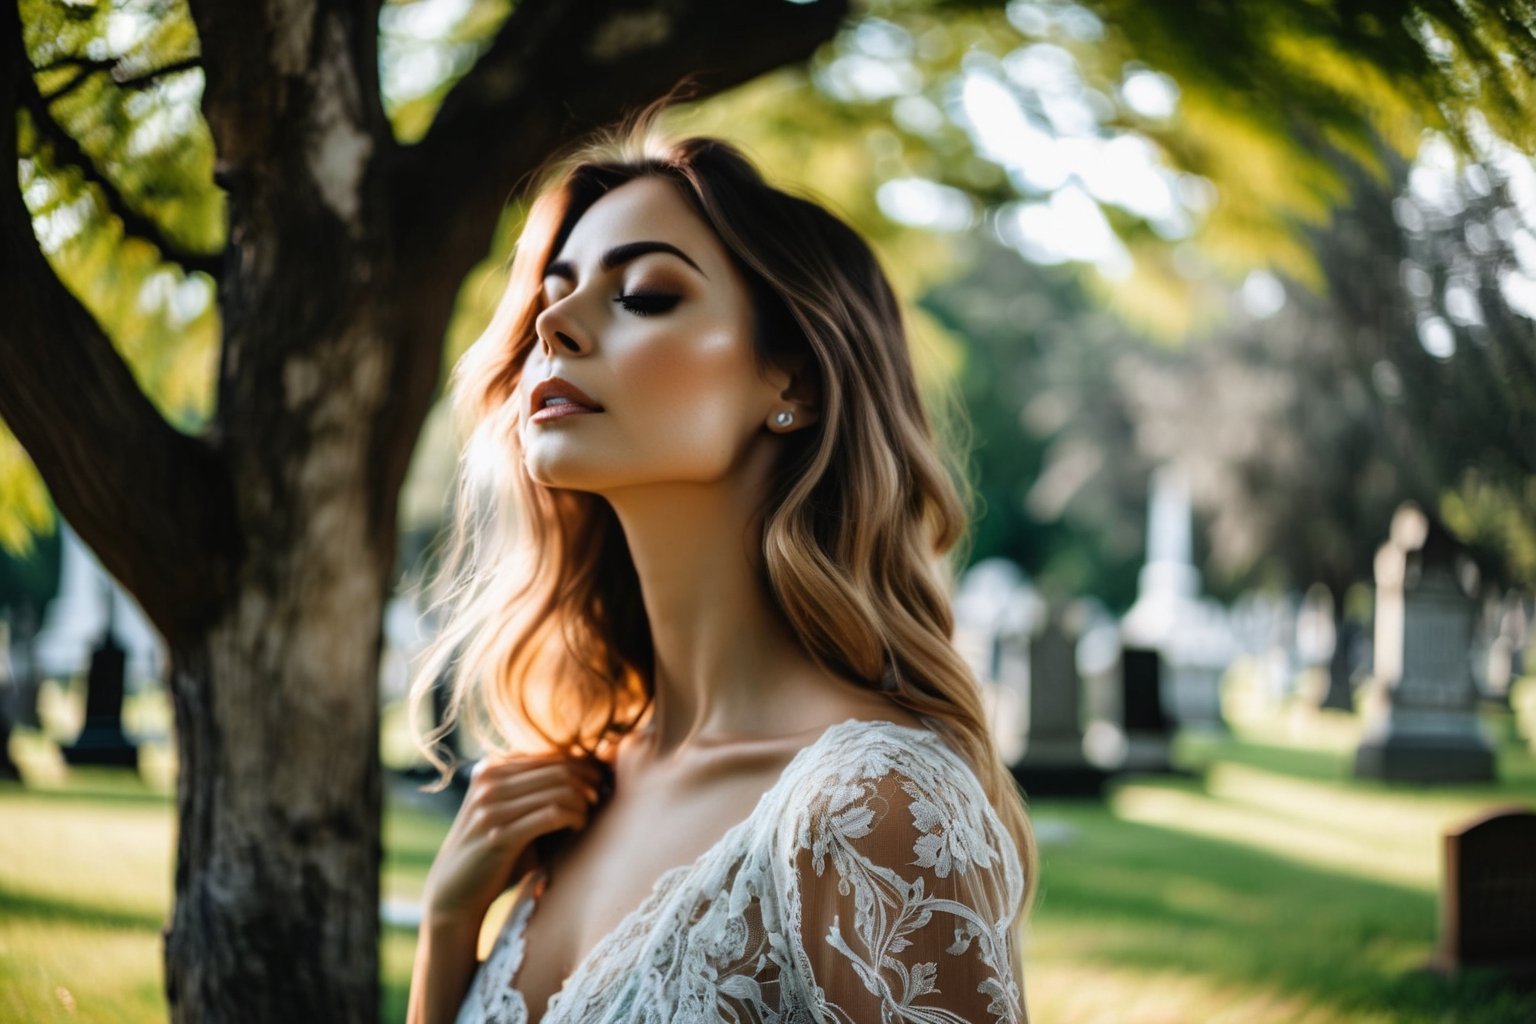 Photo.  Profile of a woman in a lace summer dress, She is looking upward with her eyes closed beside a tree.  Background is a cemetery